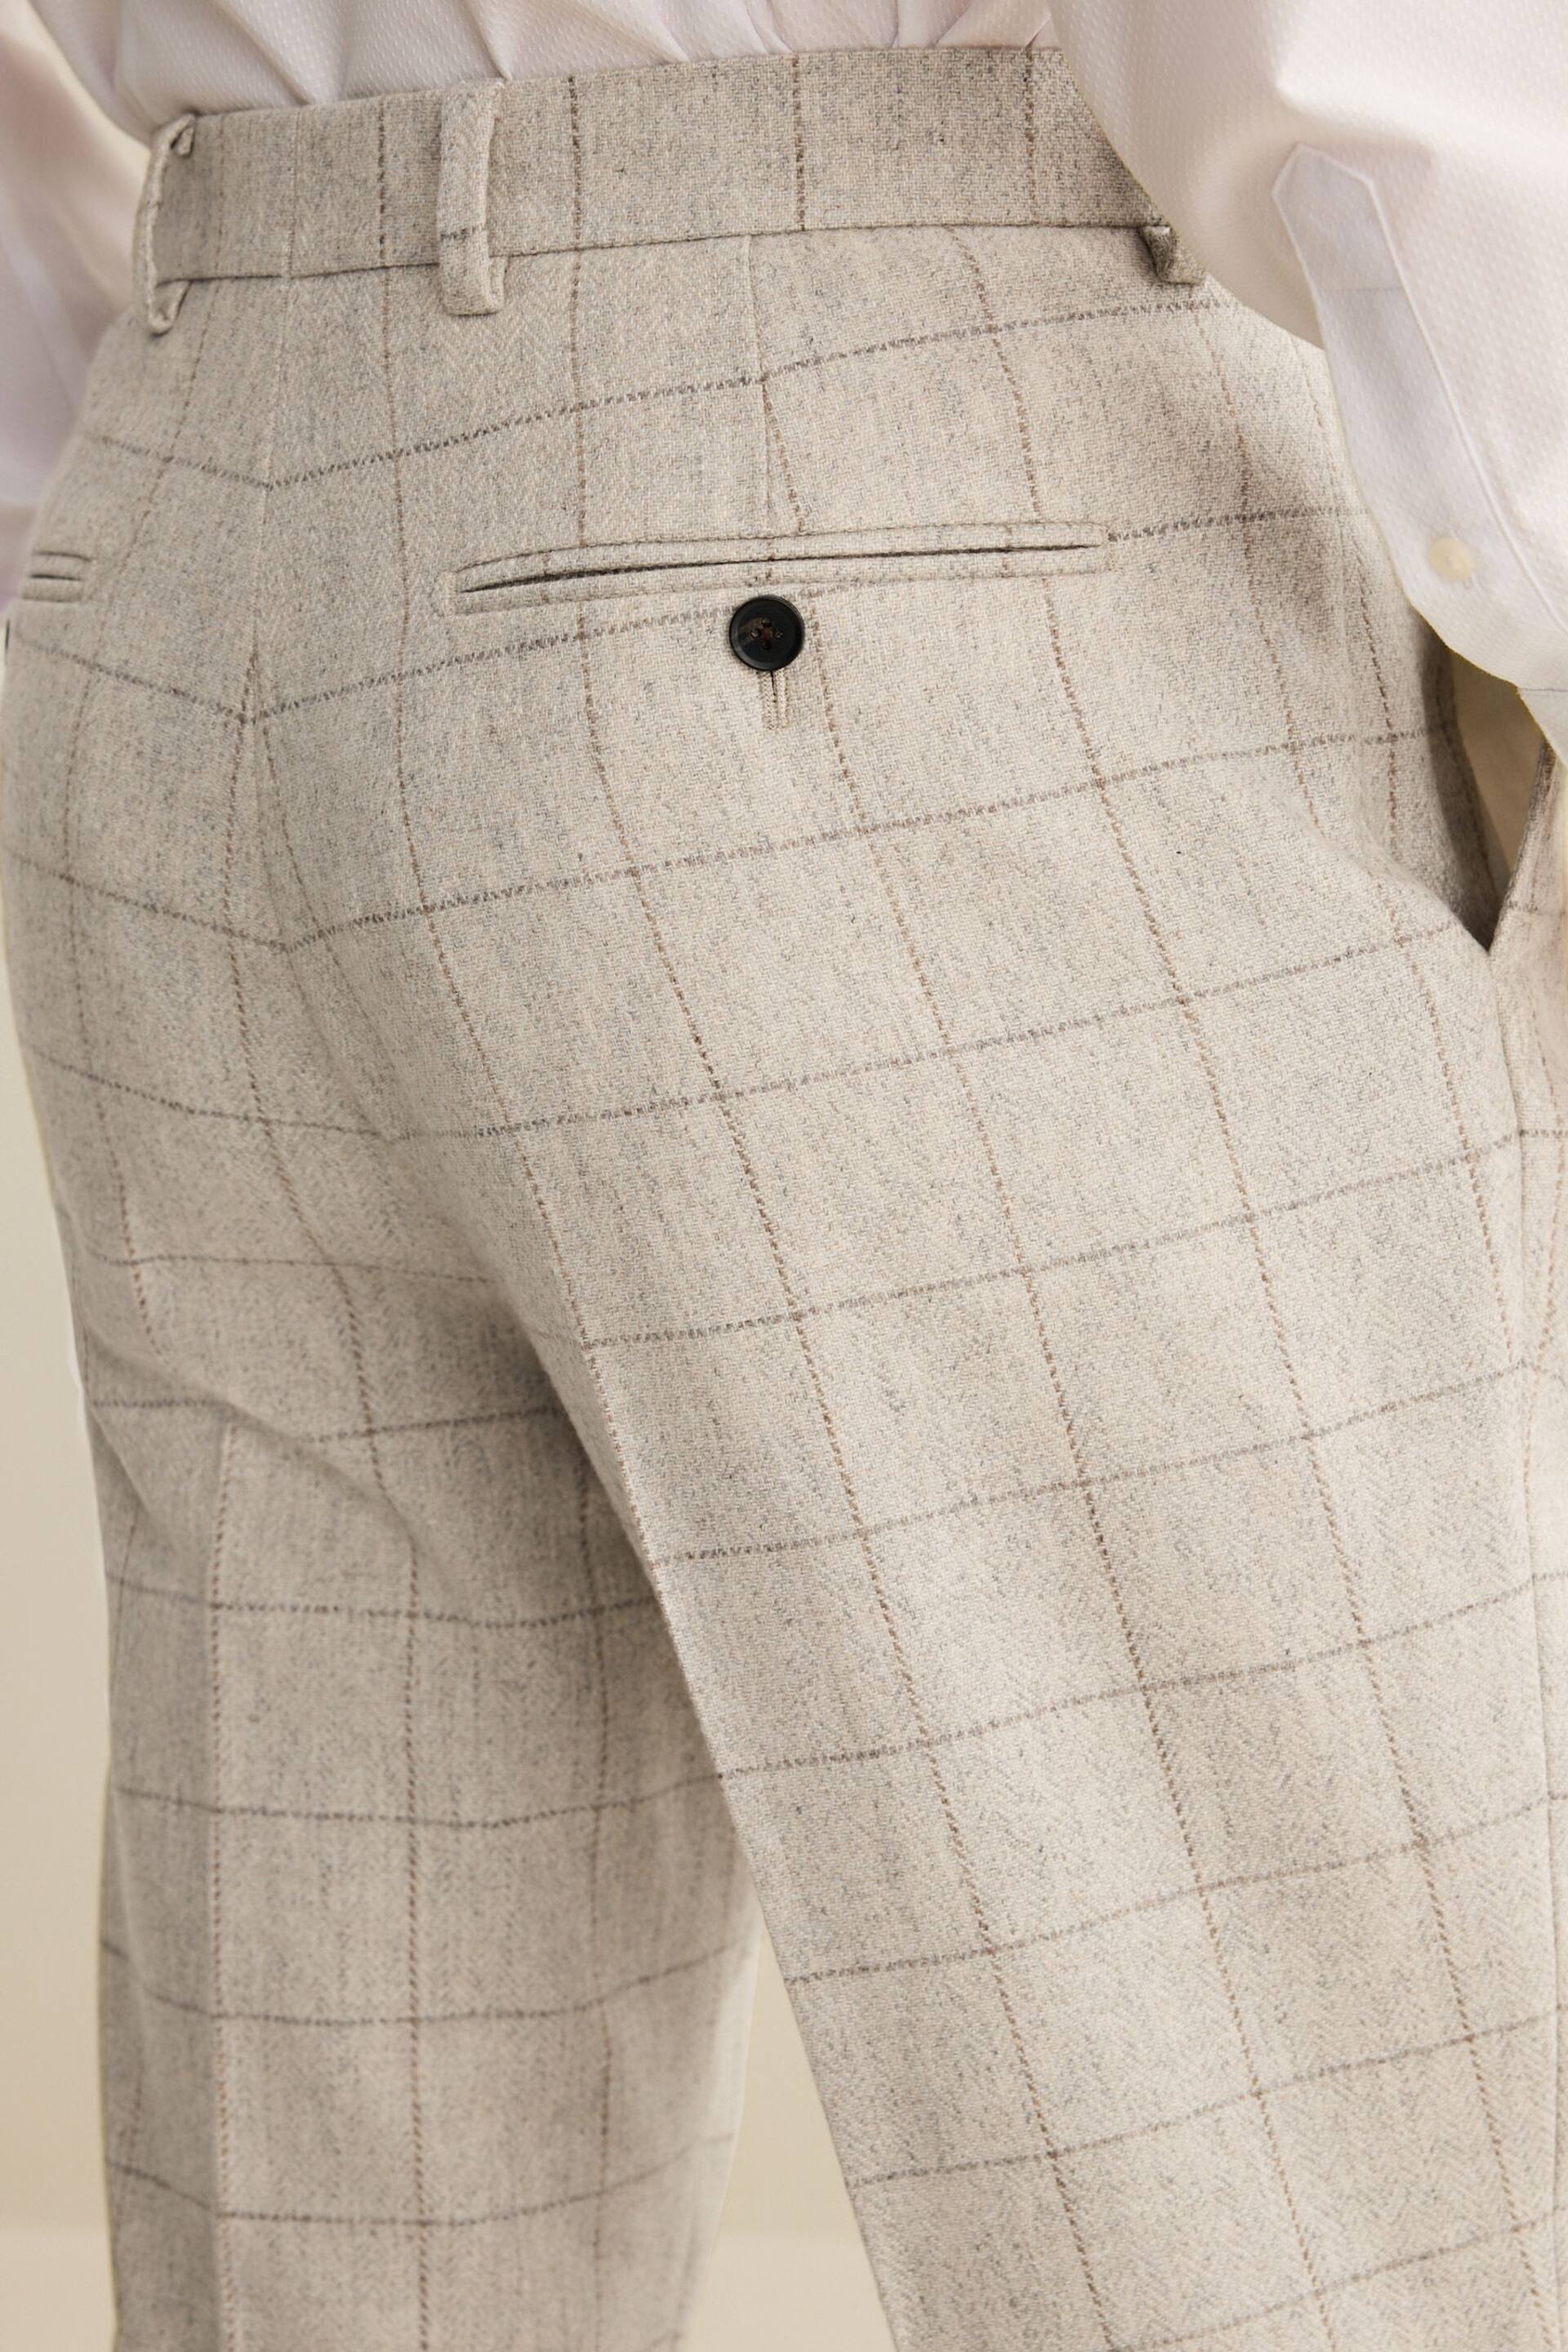 Light Grey Regular Fit Trimmed Check Suit: Trousers - Image 6 of 11